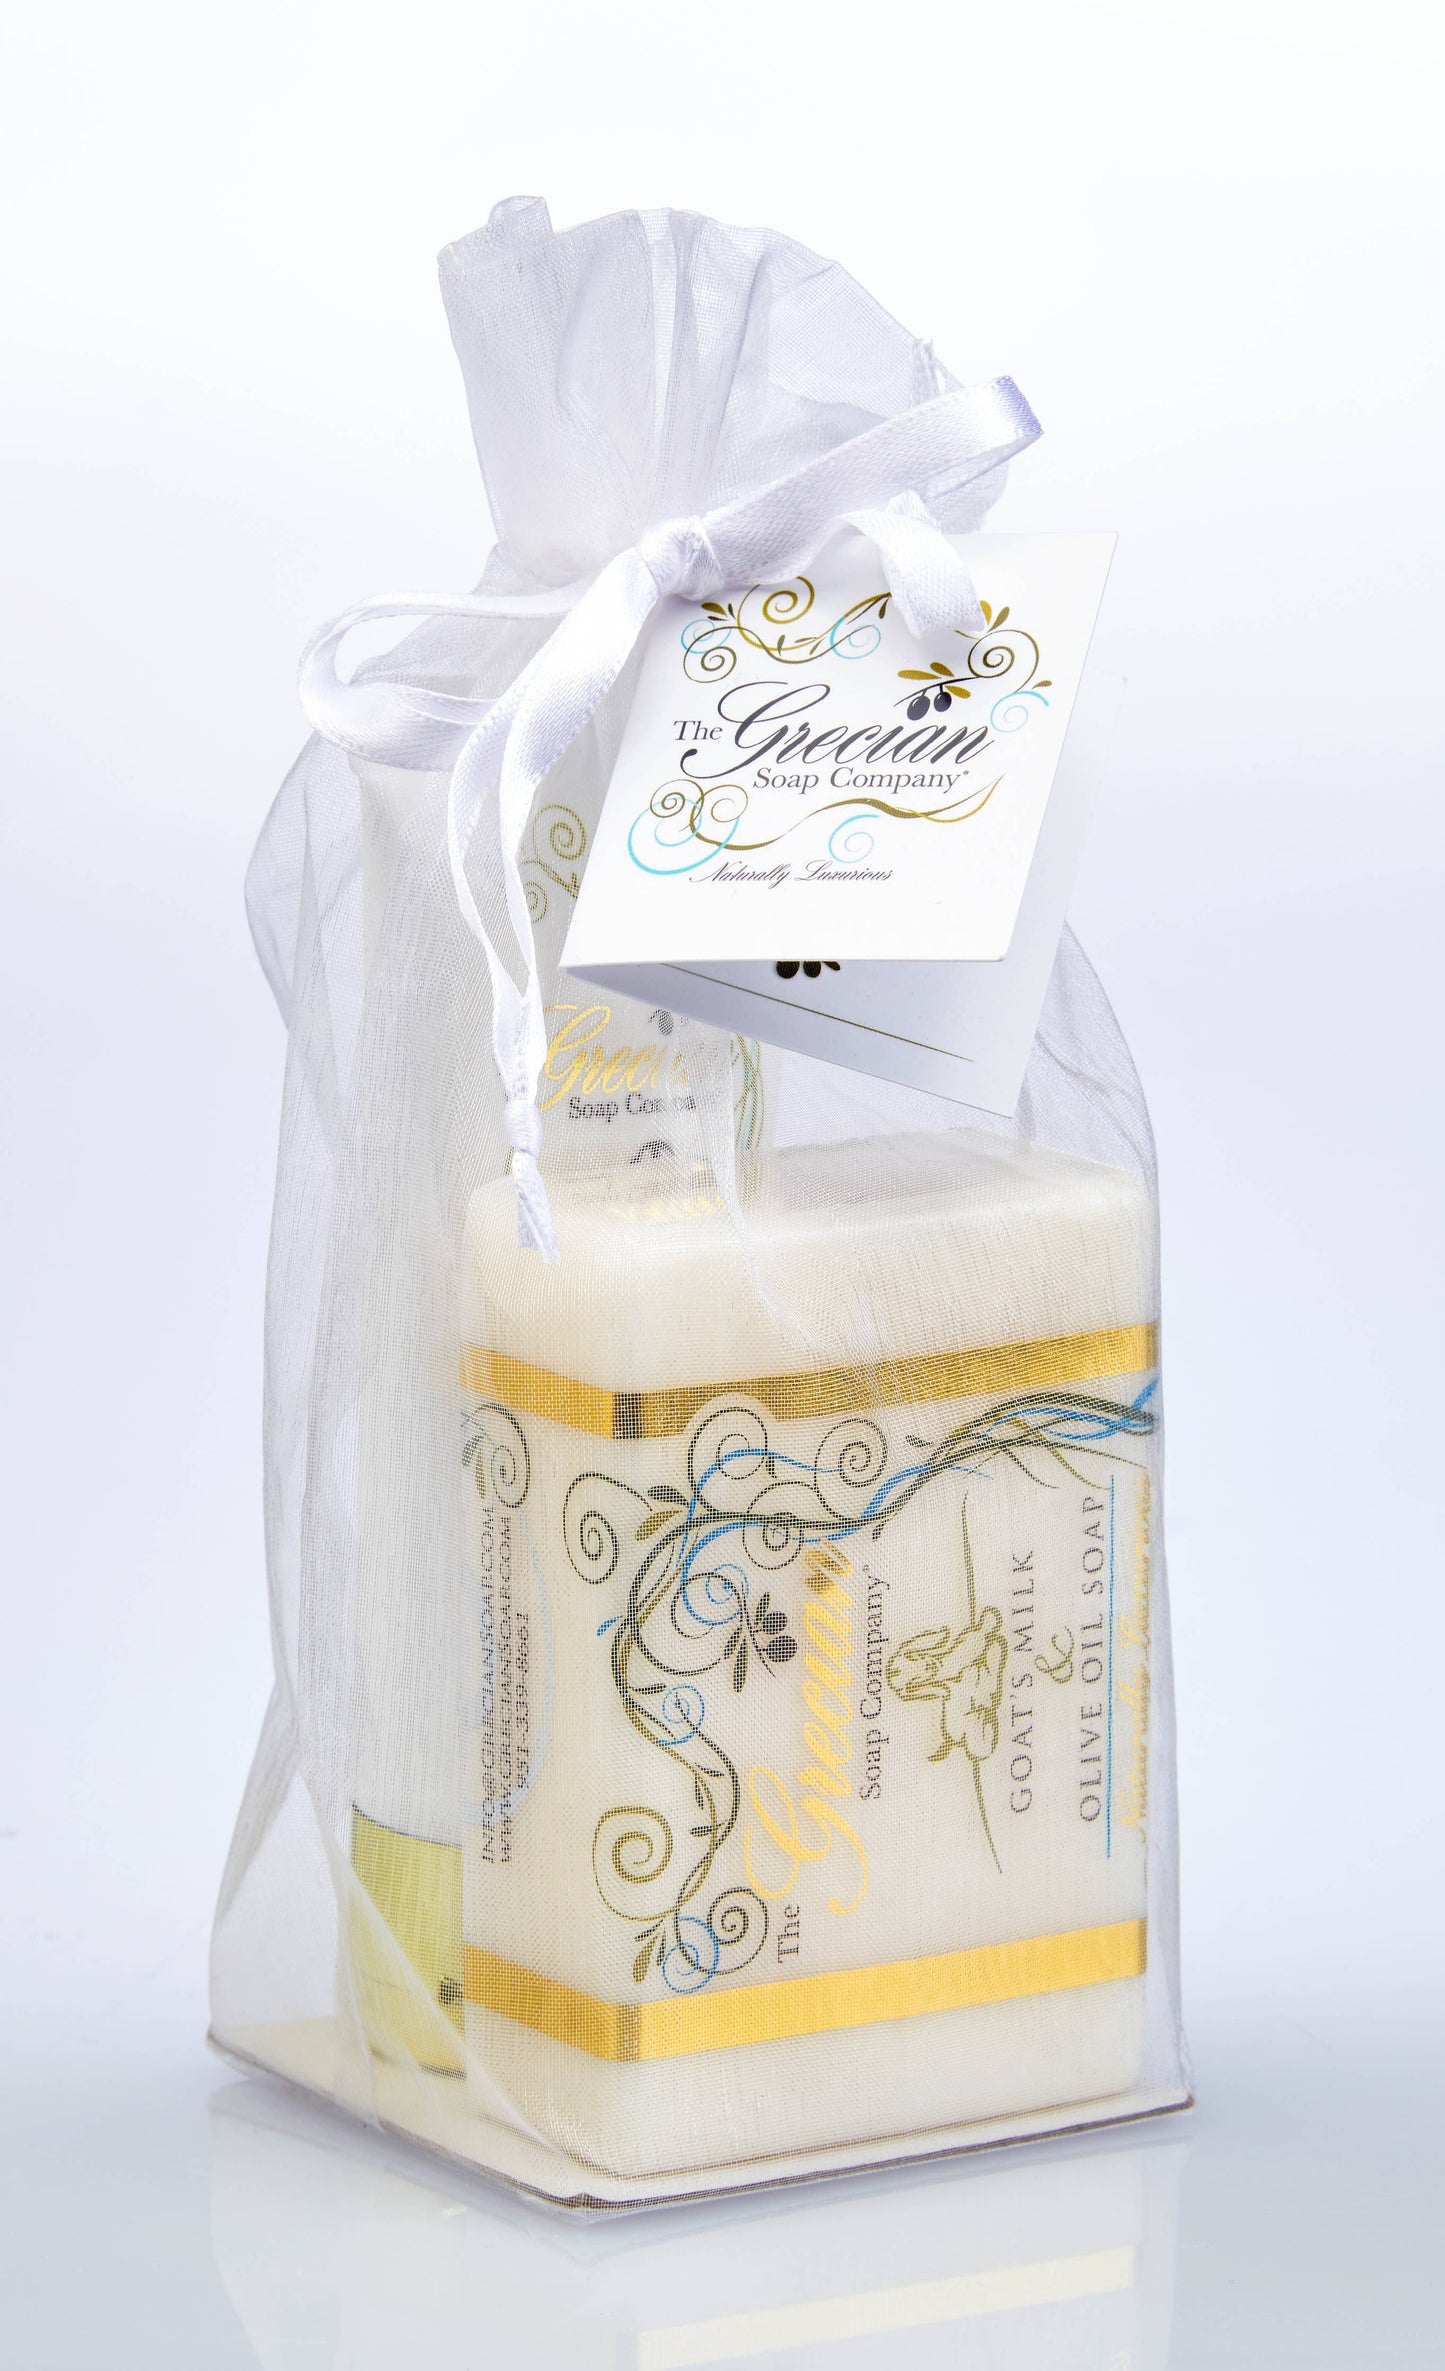 Goat's Milk Soap and Lotion Gift Set